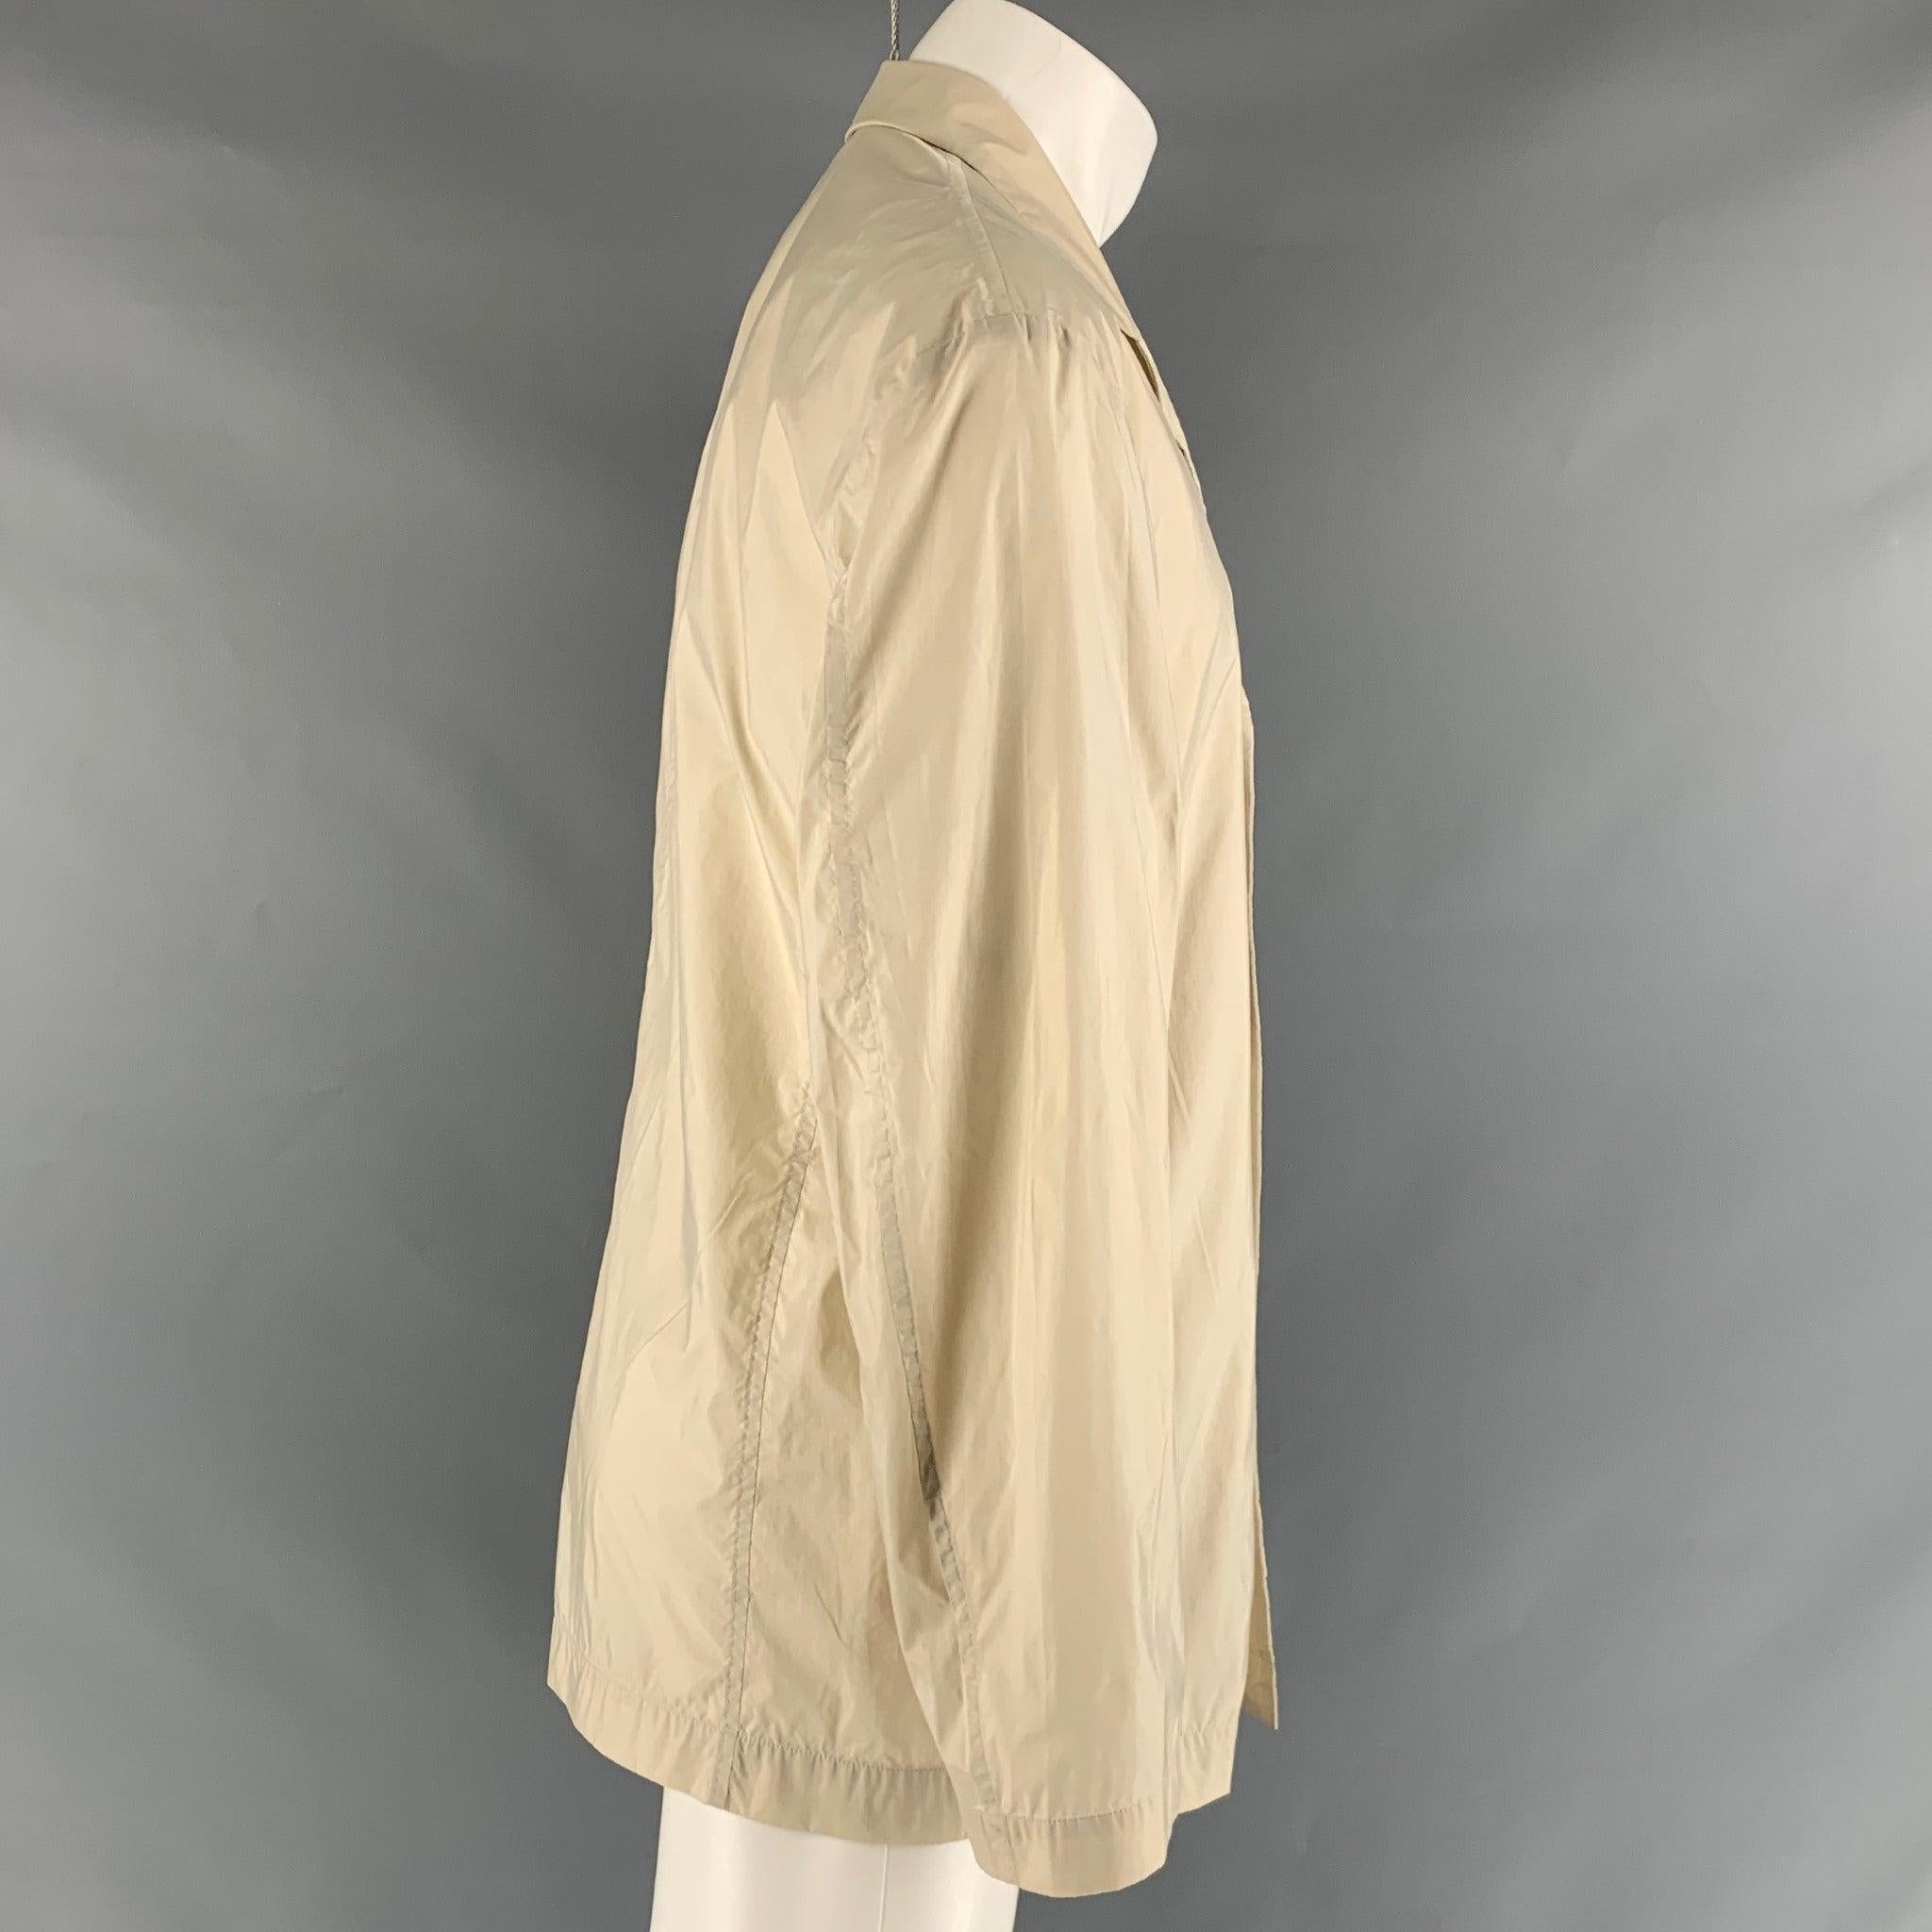 ISSEY MIYAKE jacket comes in a beige nylon woven material featuring a notch lapel, flap pockets, and a button closure. Made in Japan. Excellent Pre-Owned Condition. 

Marked:   40 

Measurements: 
 
Shoulder: 21 inches Chest: 40 inches Sleeve: 24